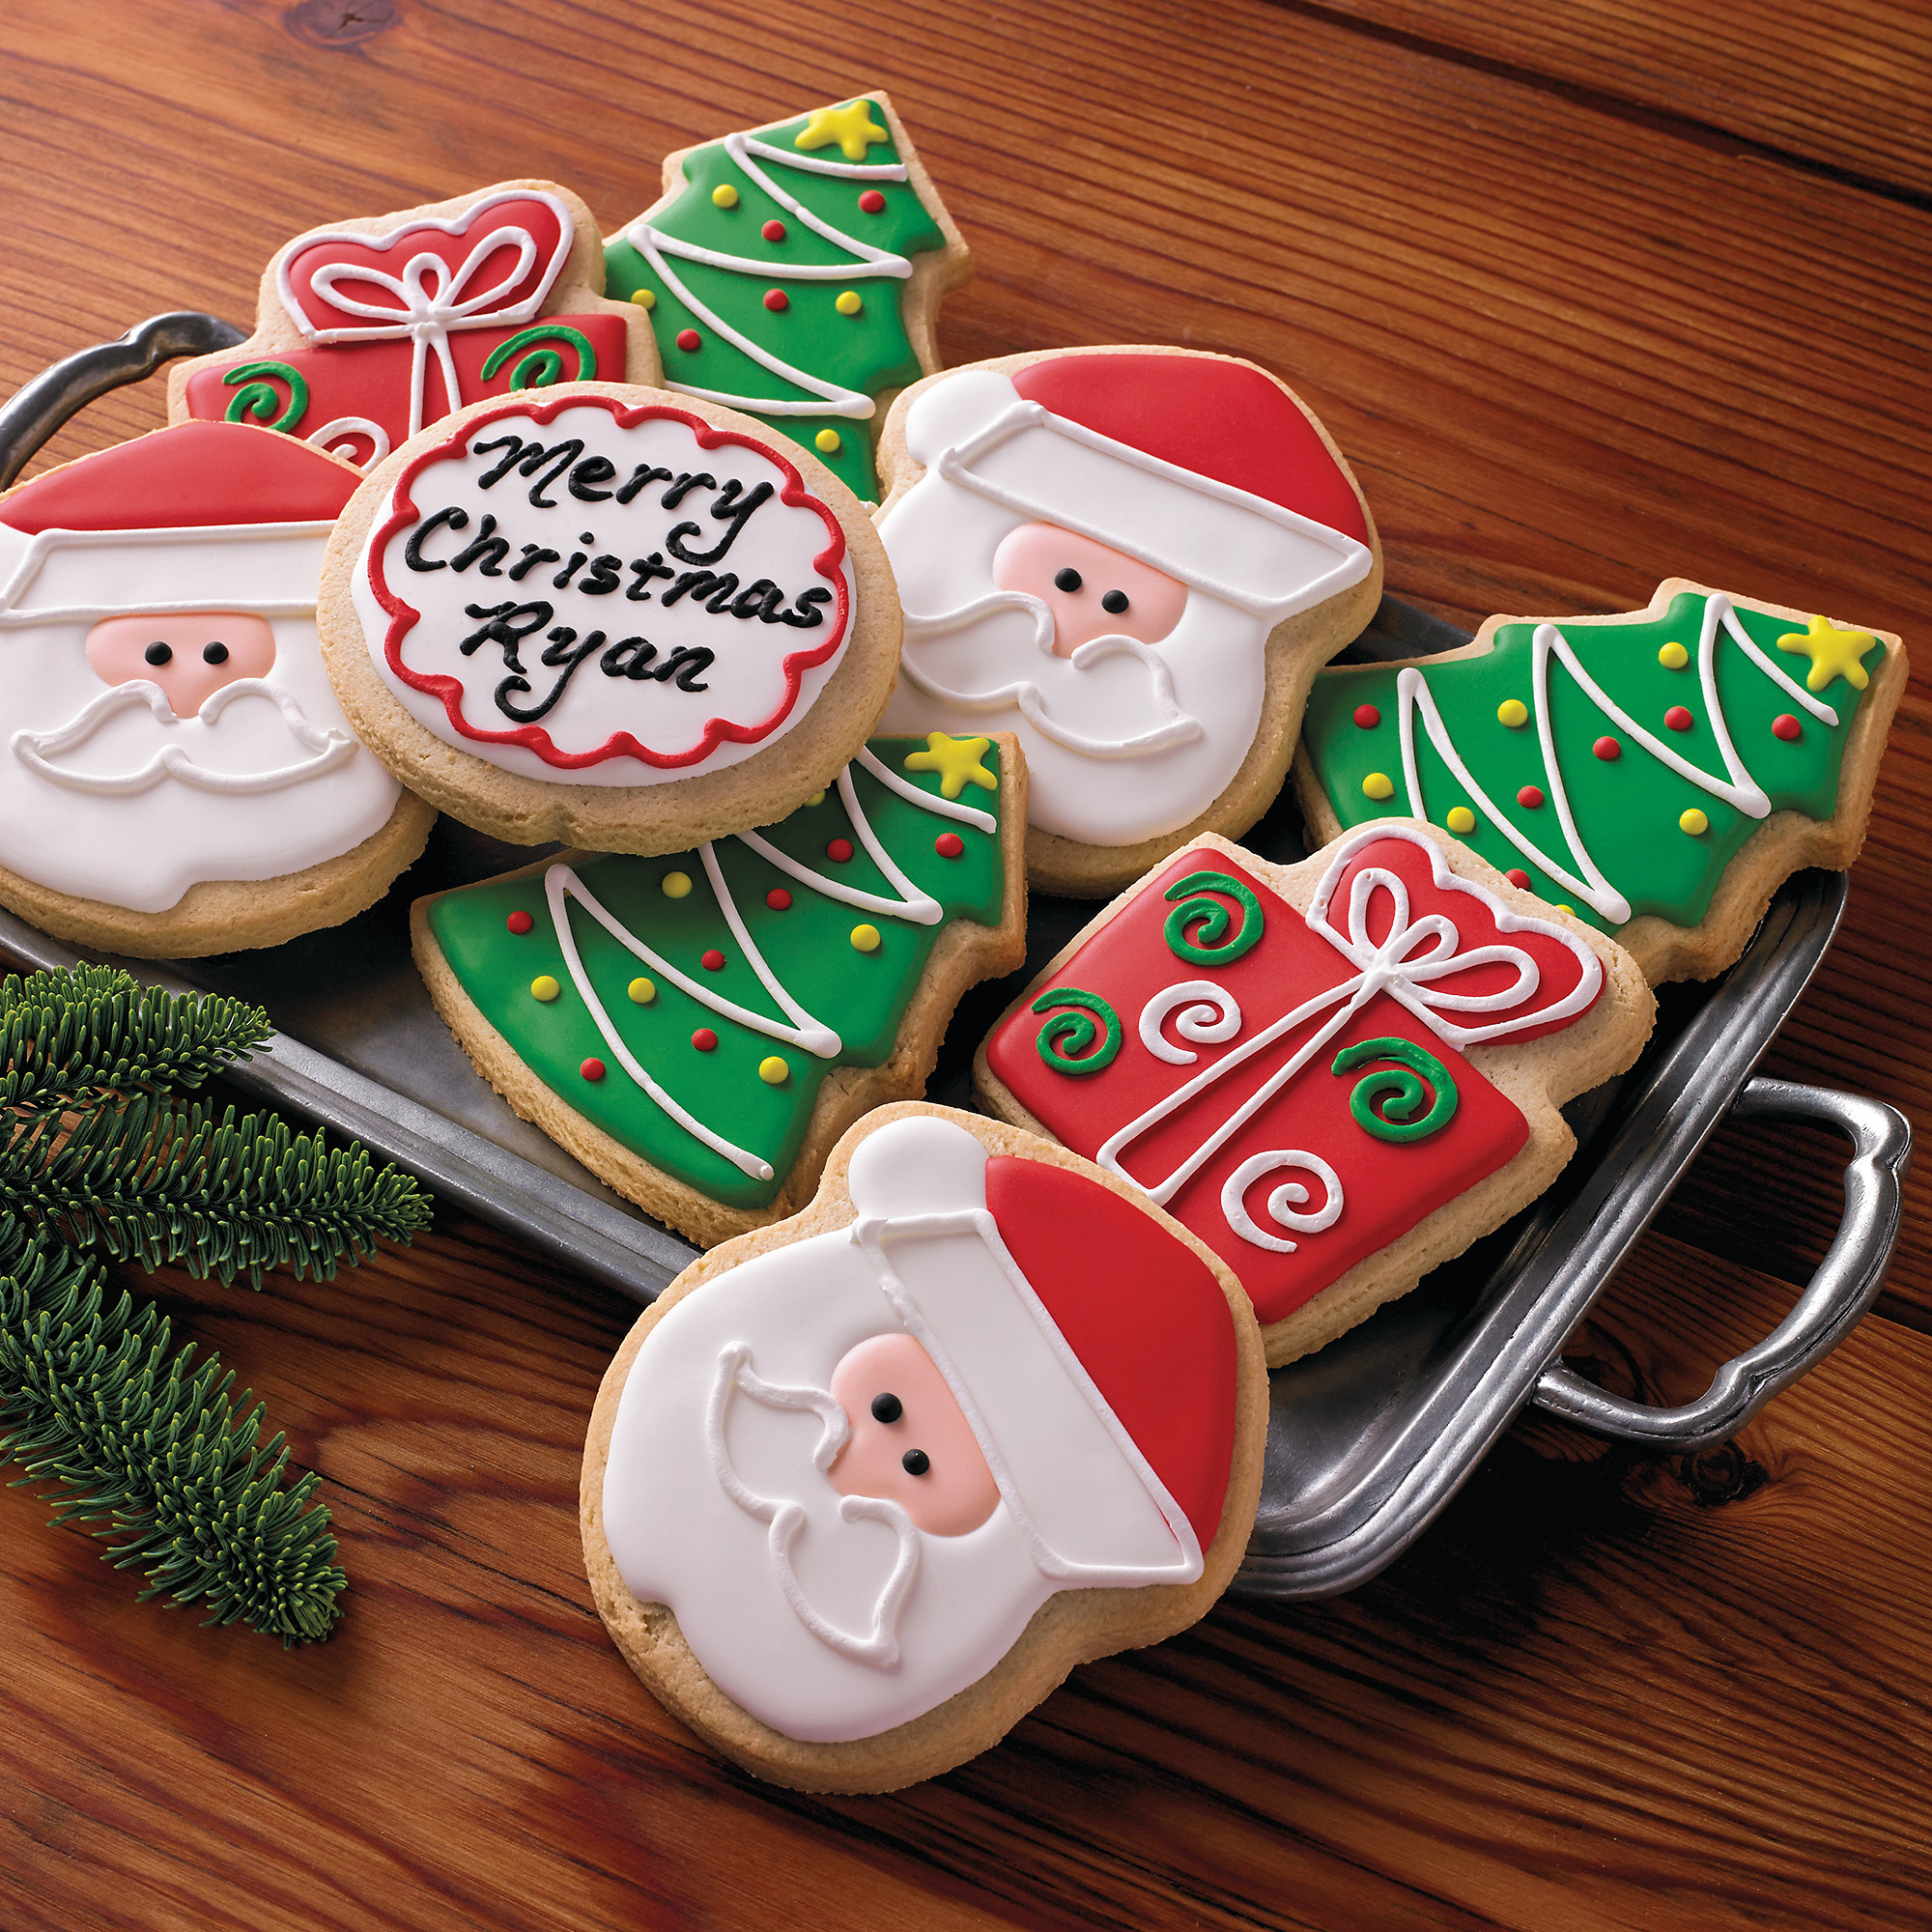 Special Christmas Cookies
 click on image to zoom